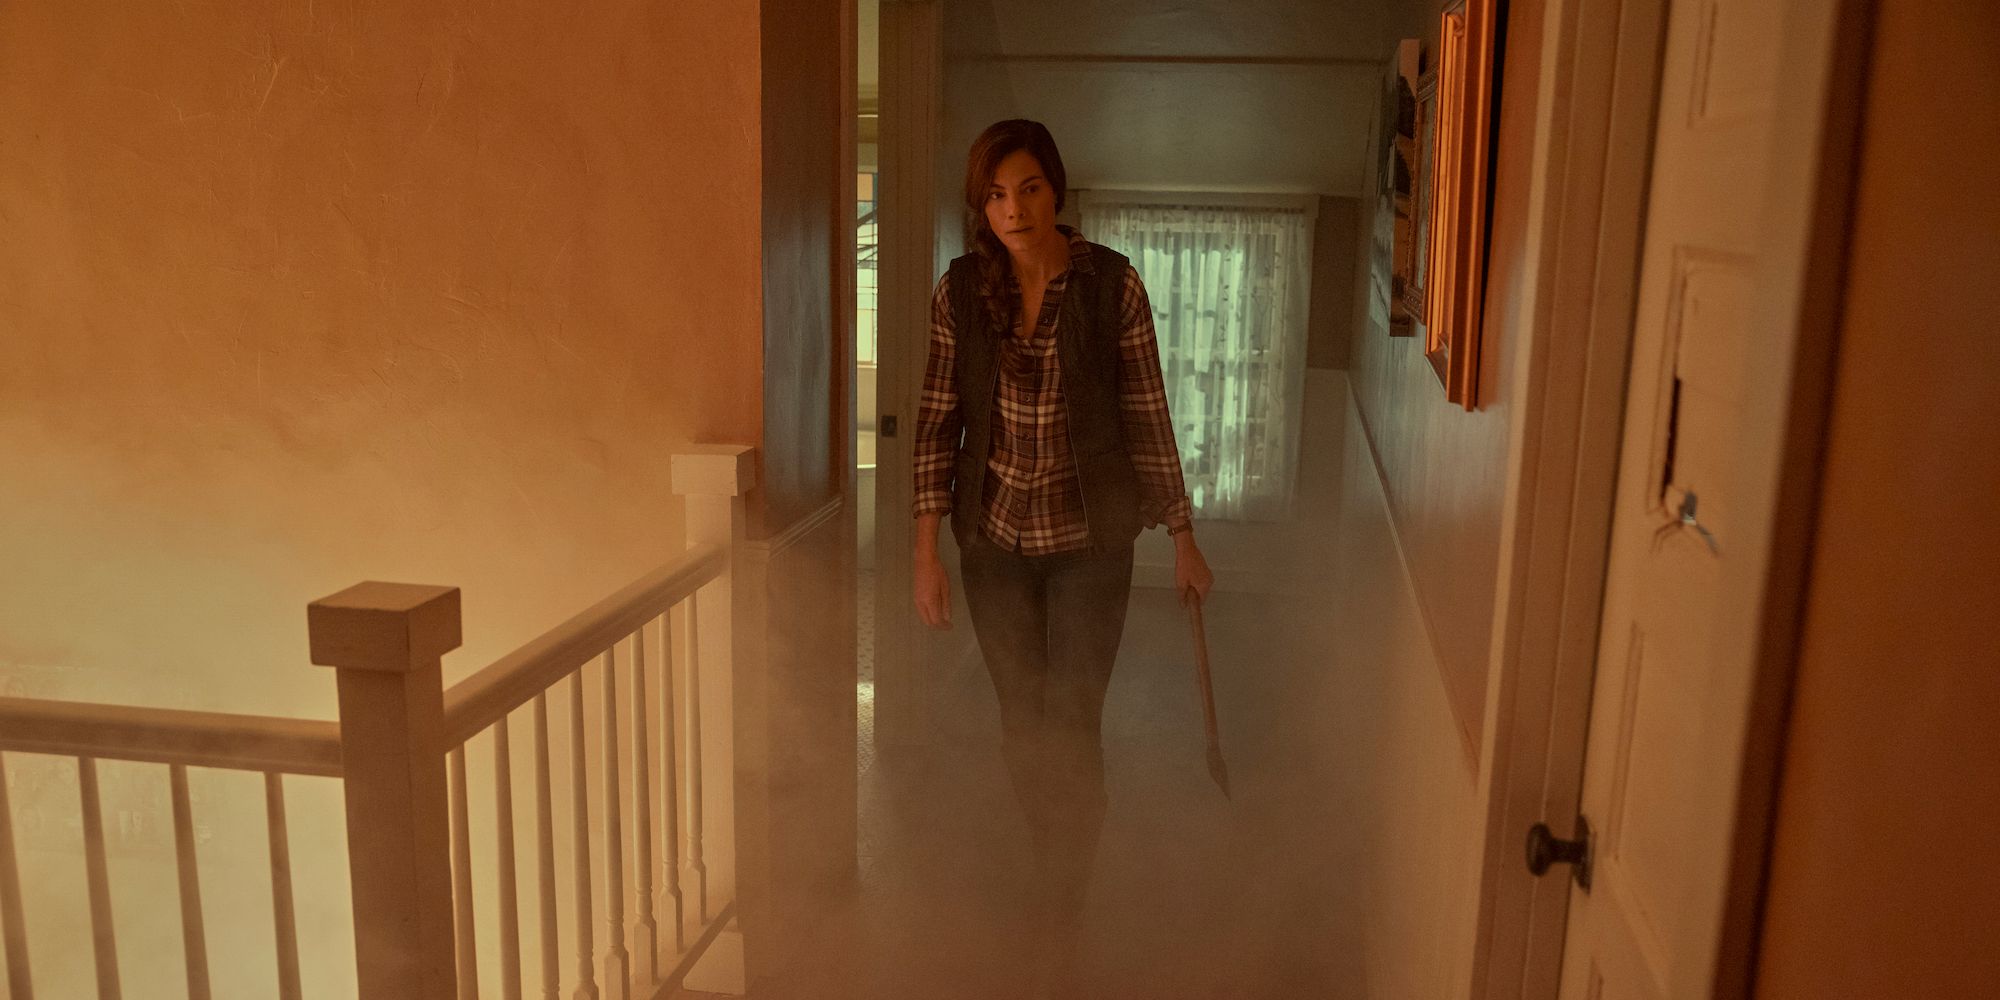 A woman walks through a burning house in Echoes 